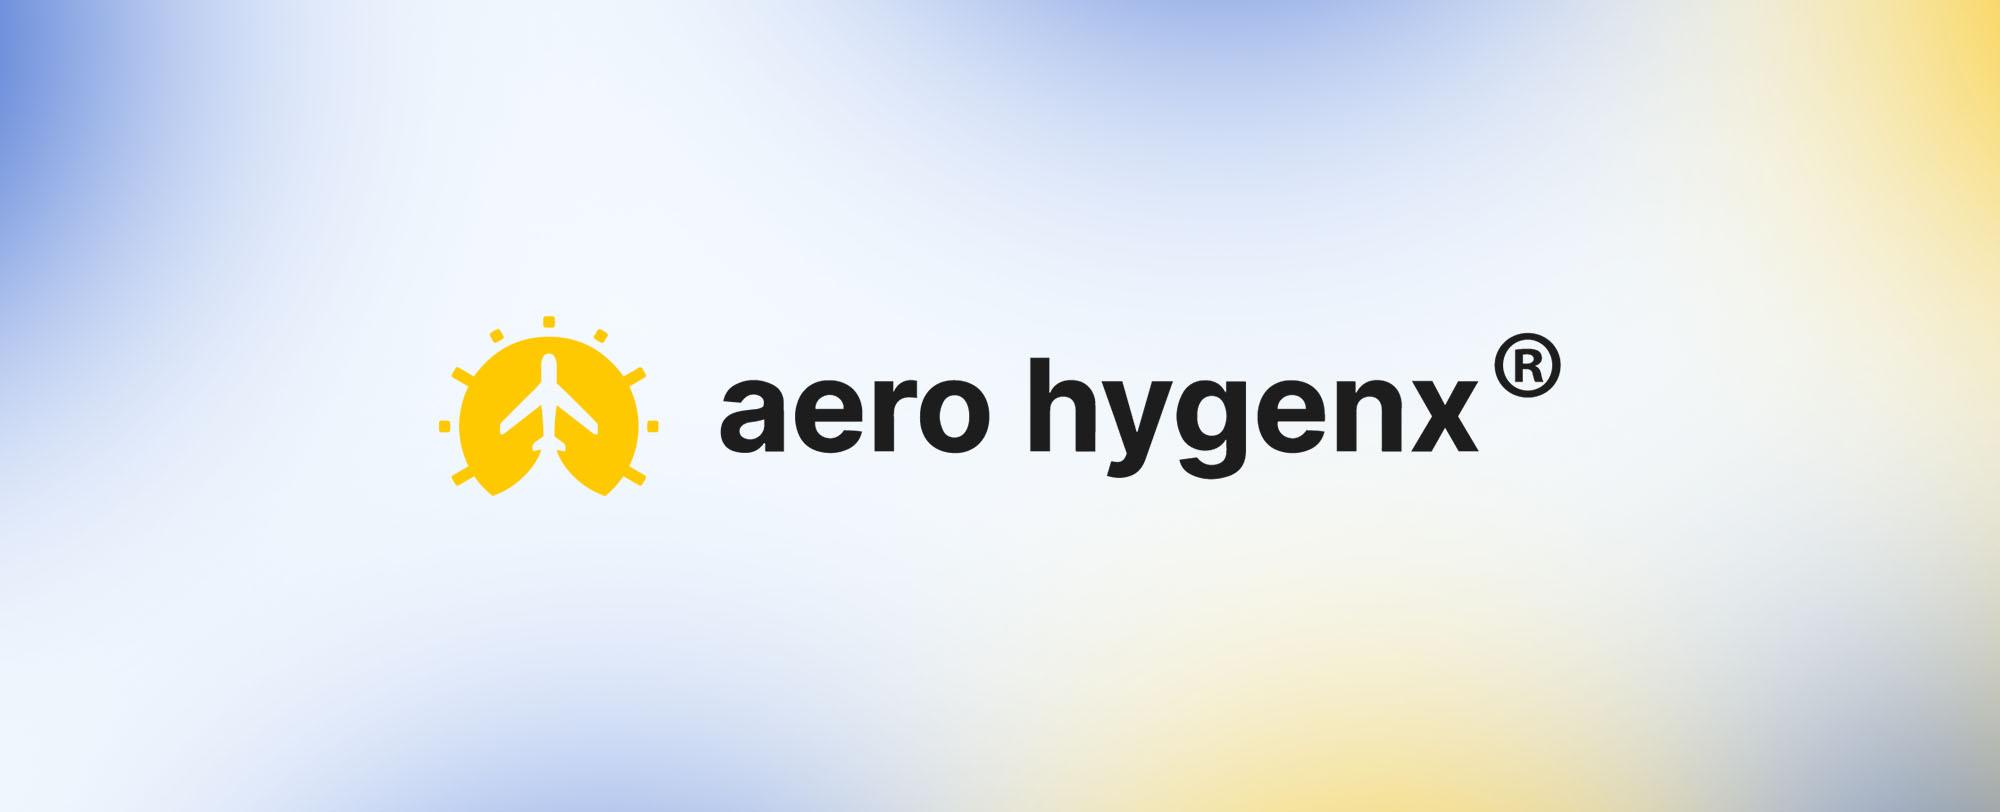 Product Aero Hygenx | UV-Xposure Labs | Our Services image